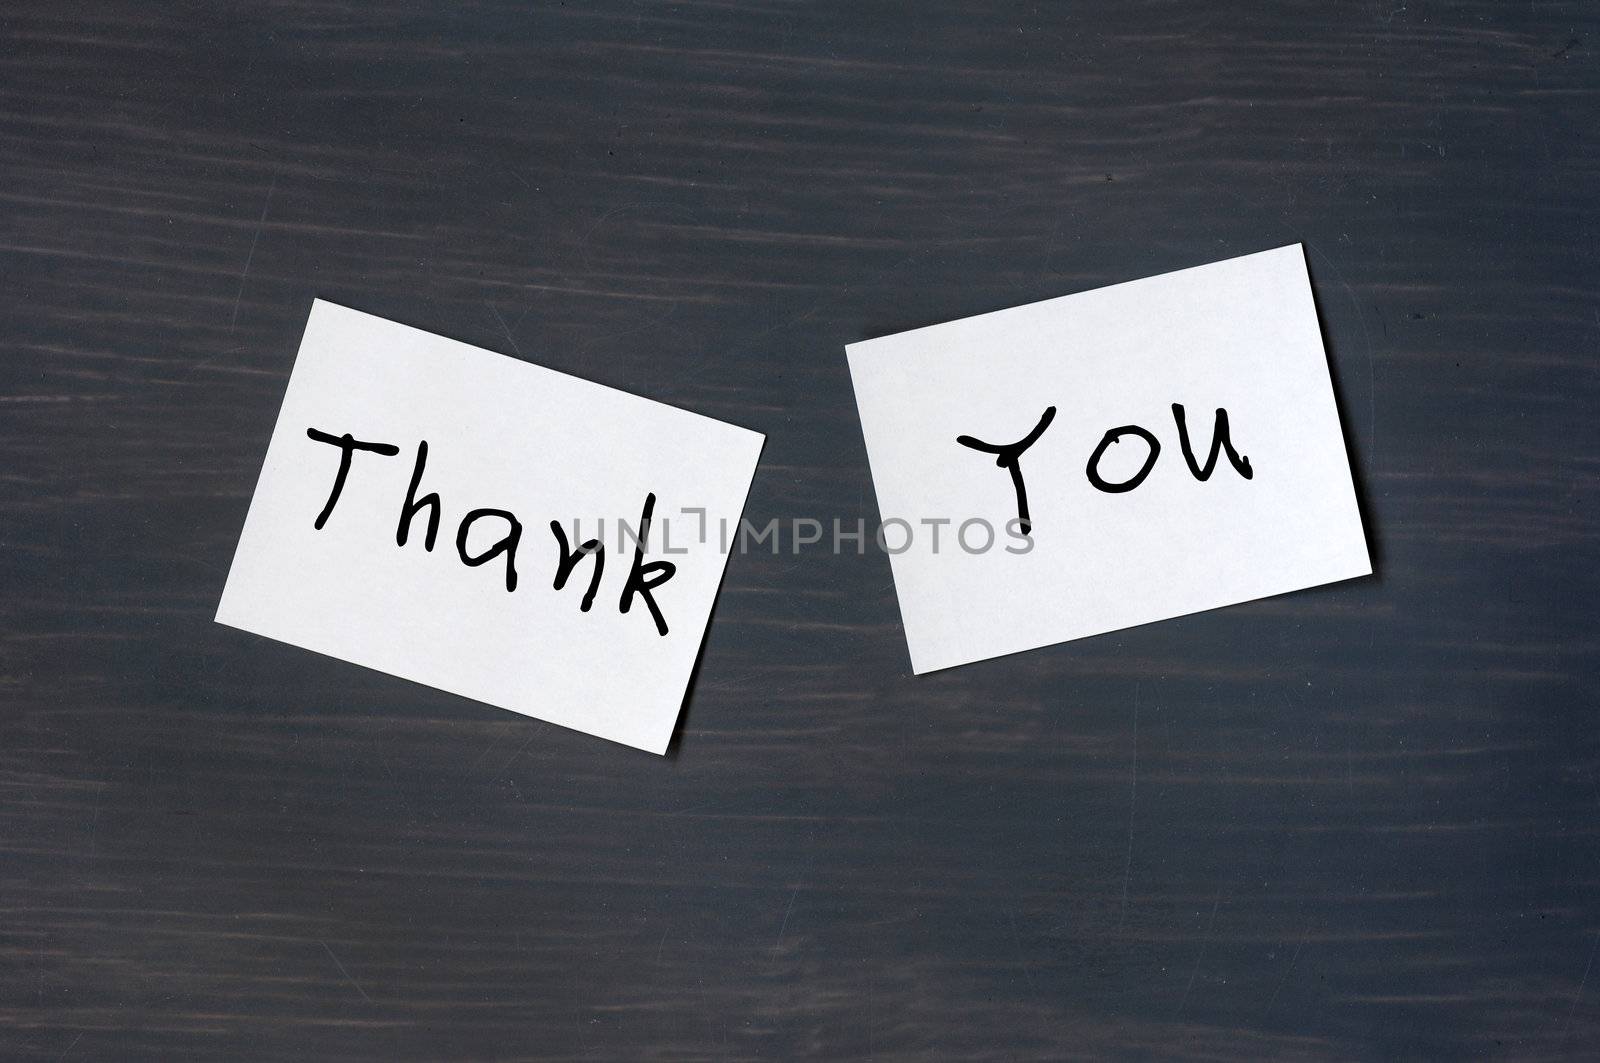 Thank you written on note sticked to a blackboard